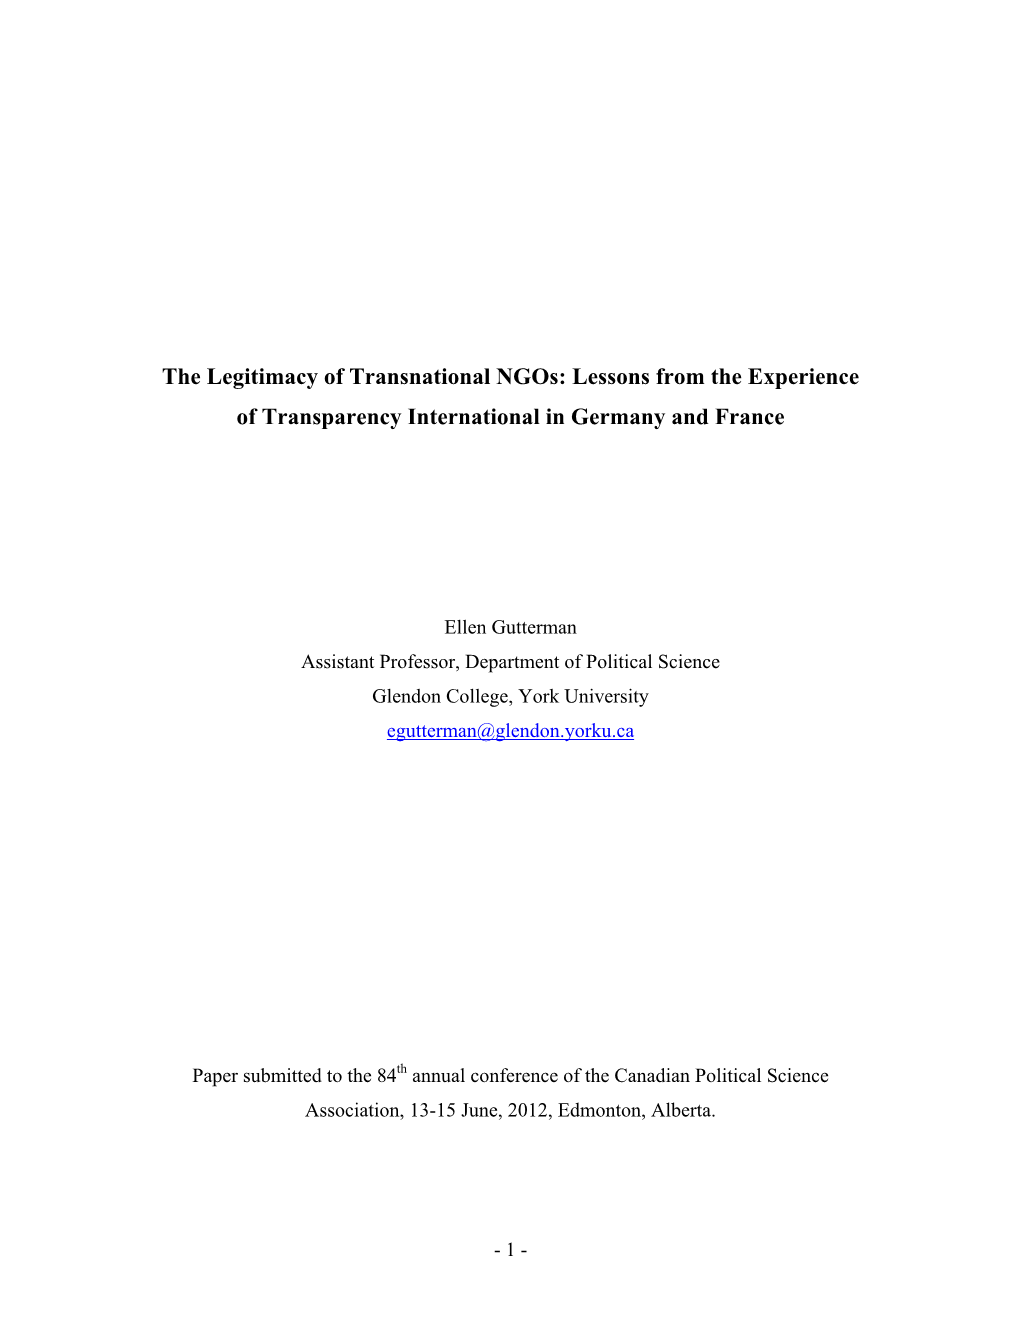 The Legitimacy of Transnational Ngos: Lessons from the Experience of Transparency International in Germany and France